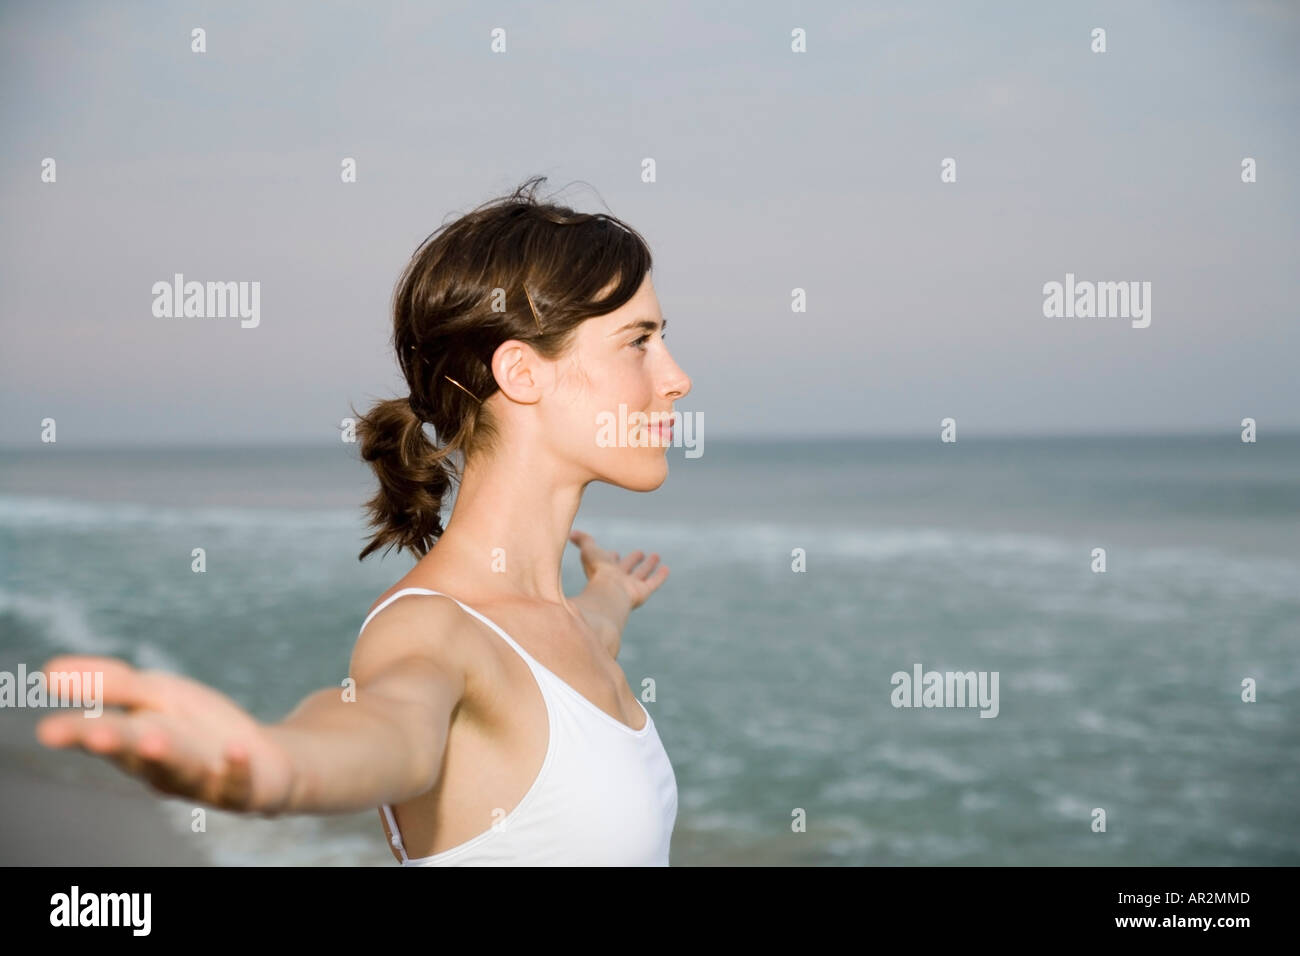 Woman standing on beach with arms outstretched Stock Photo